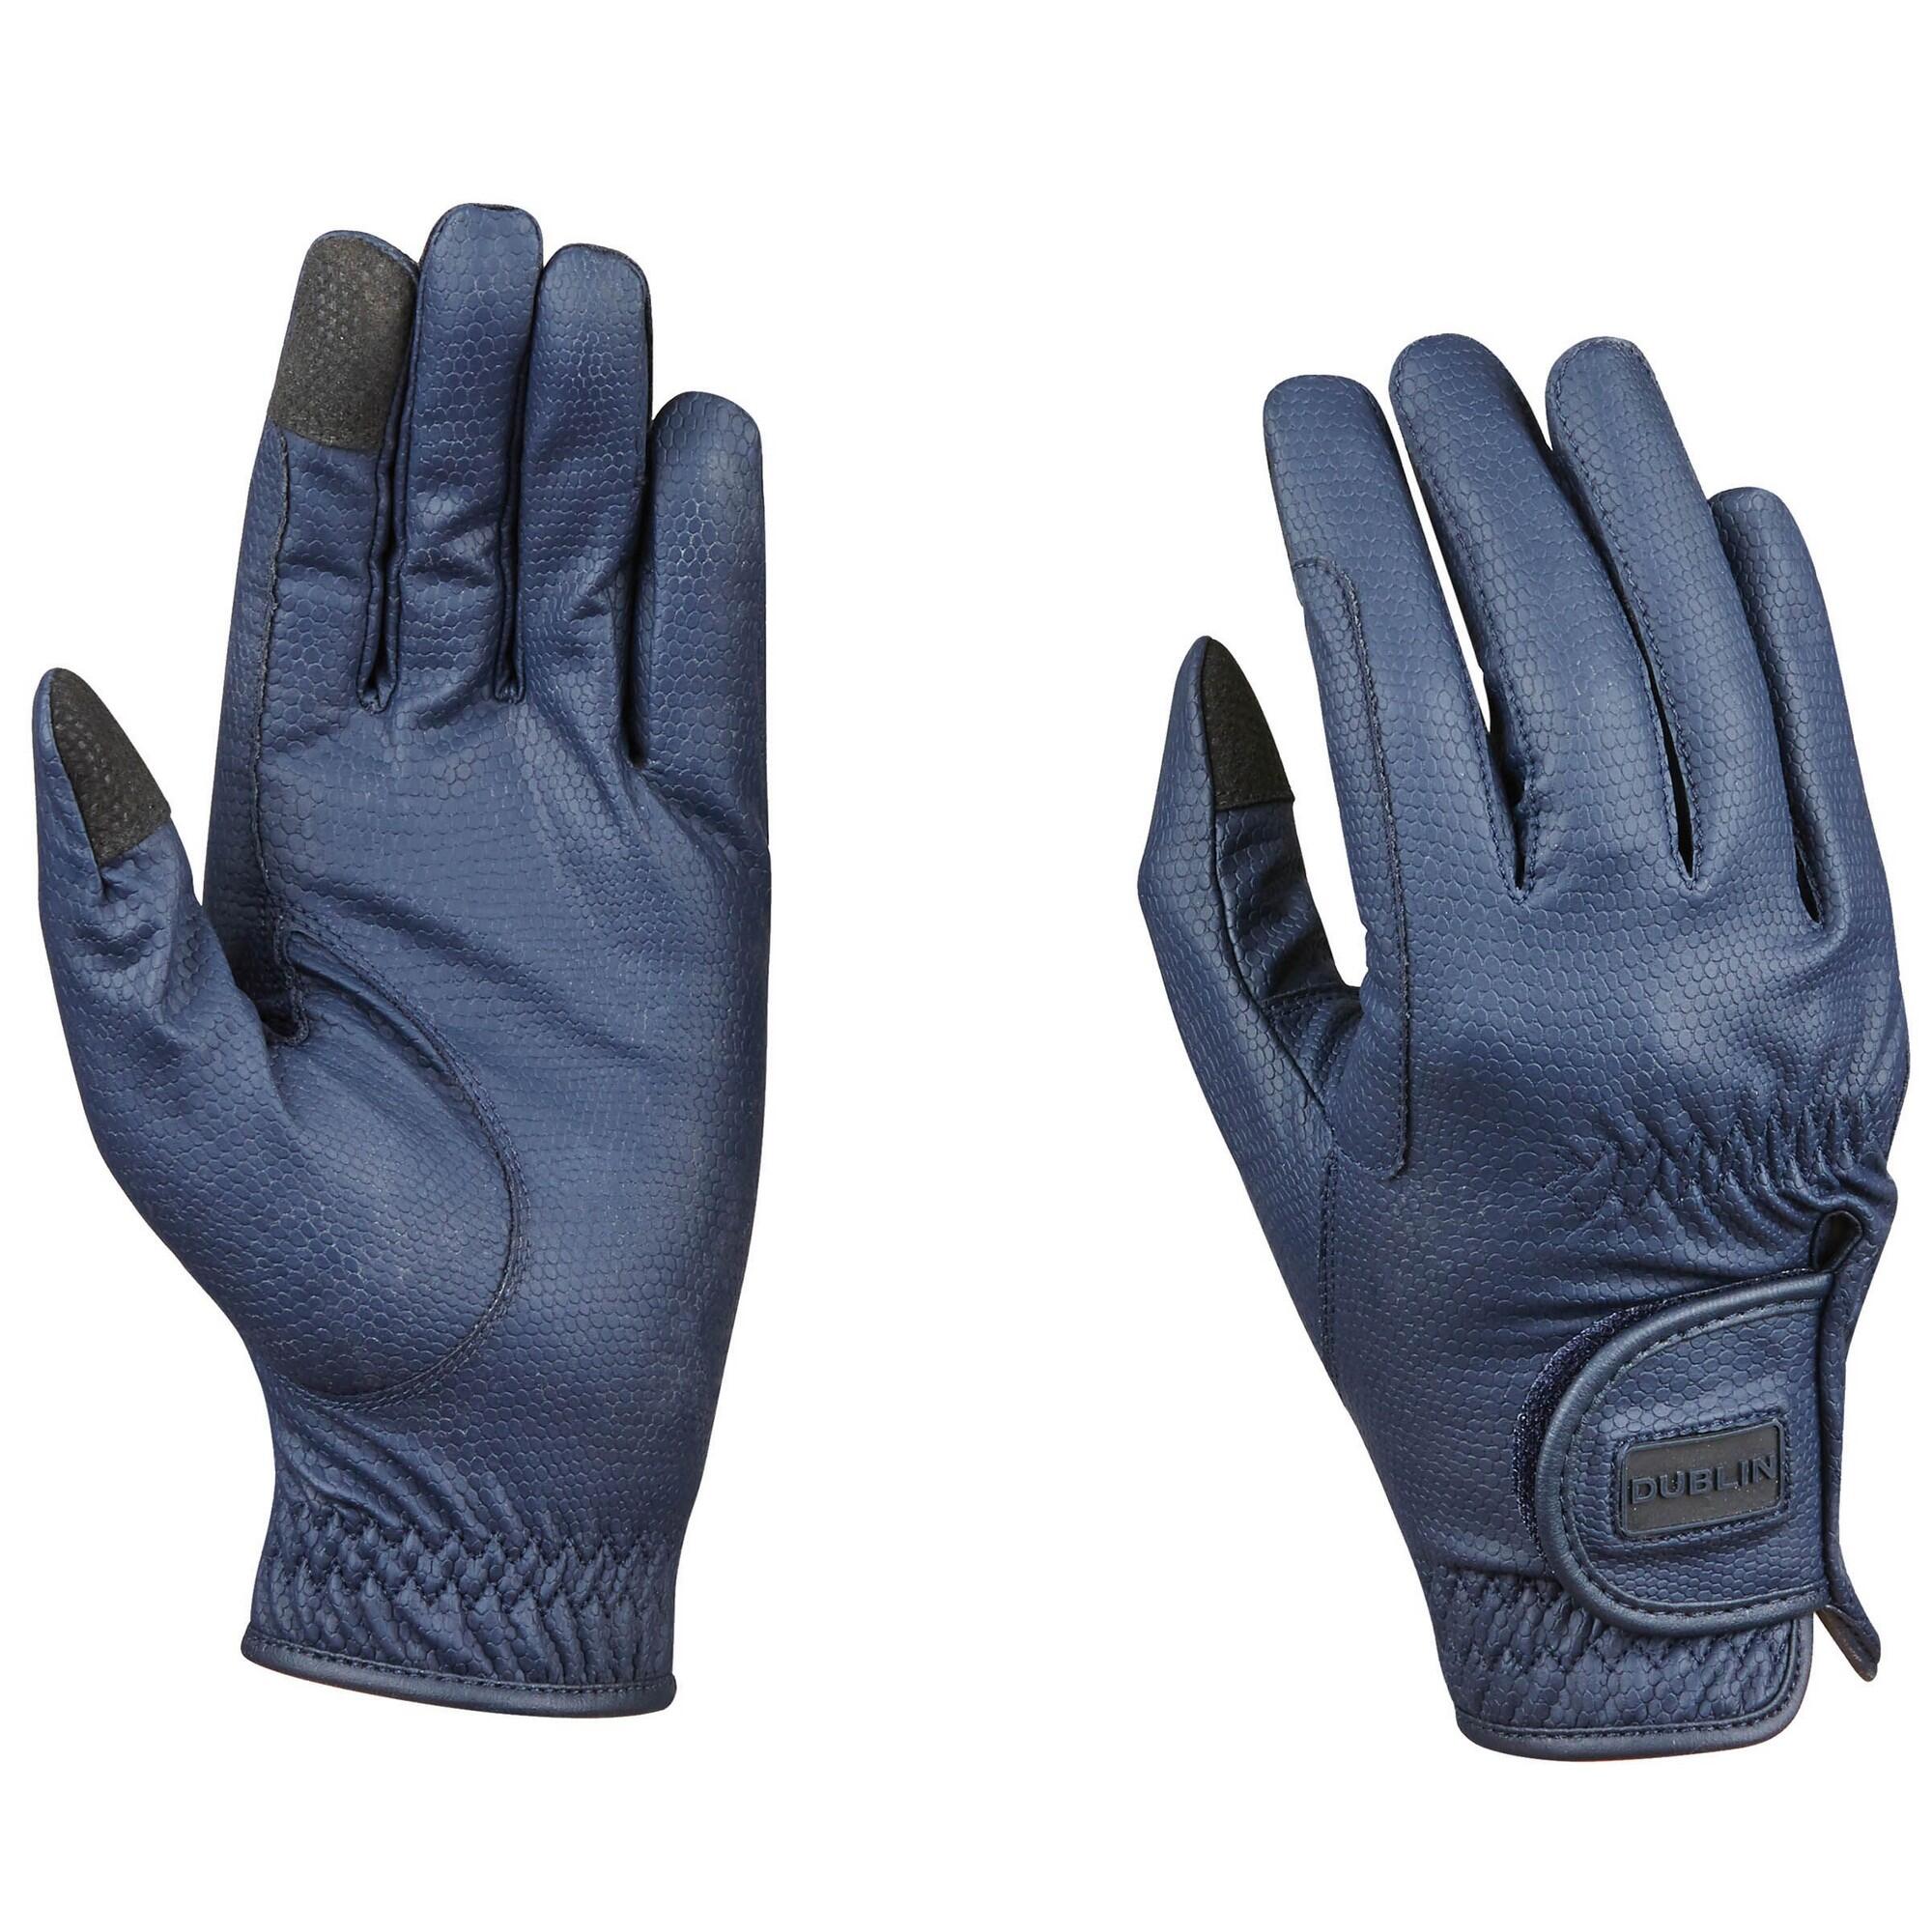 DUBLIN Touch Screen Everyday Riding Gloves (Navy)